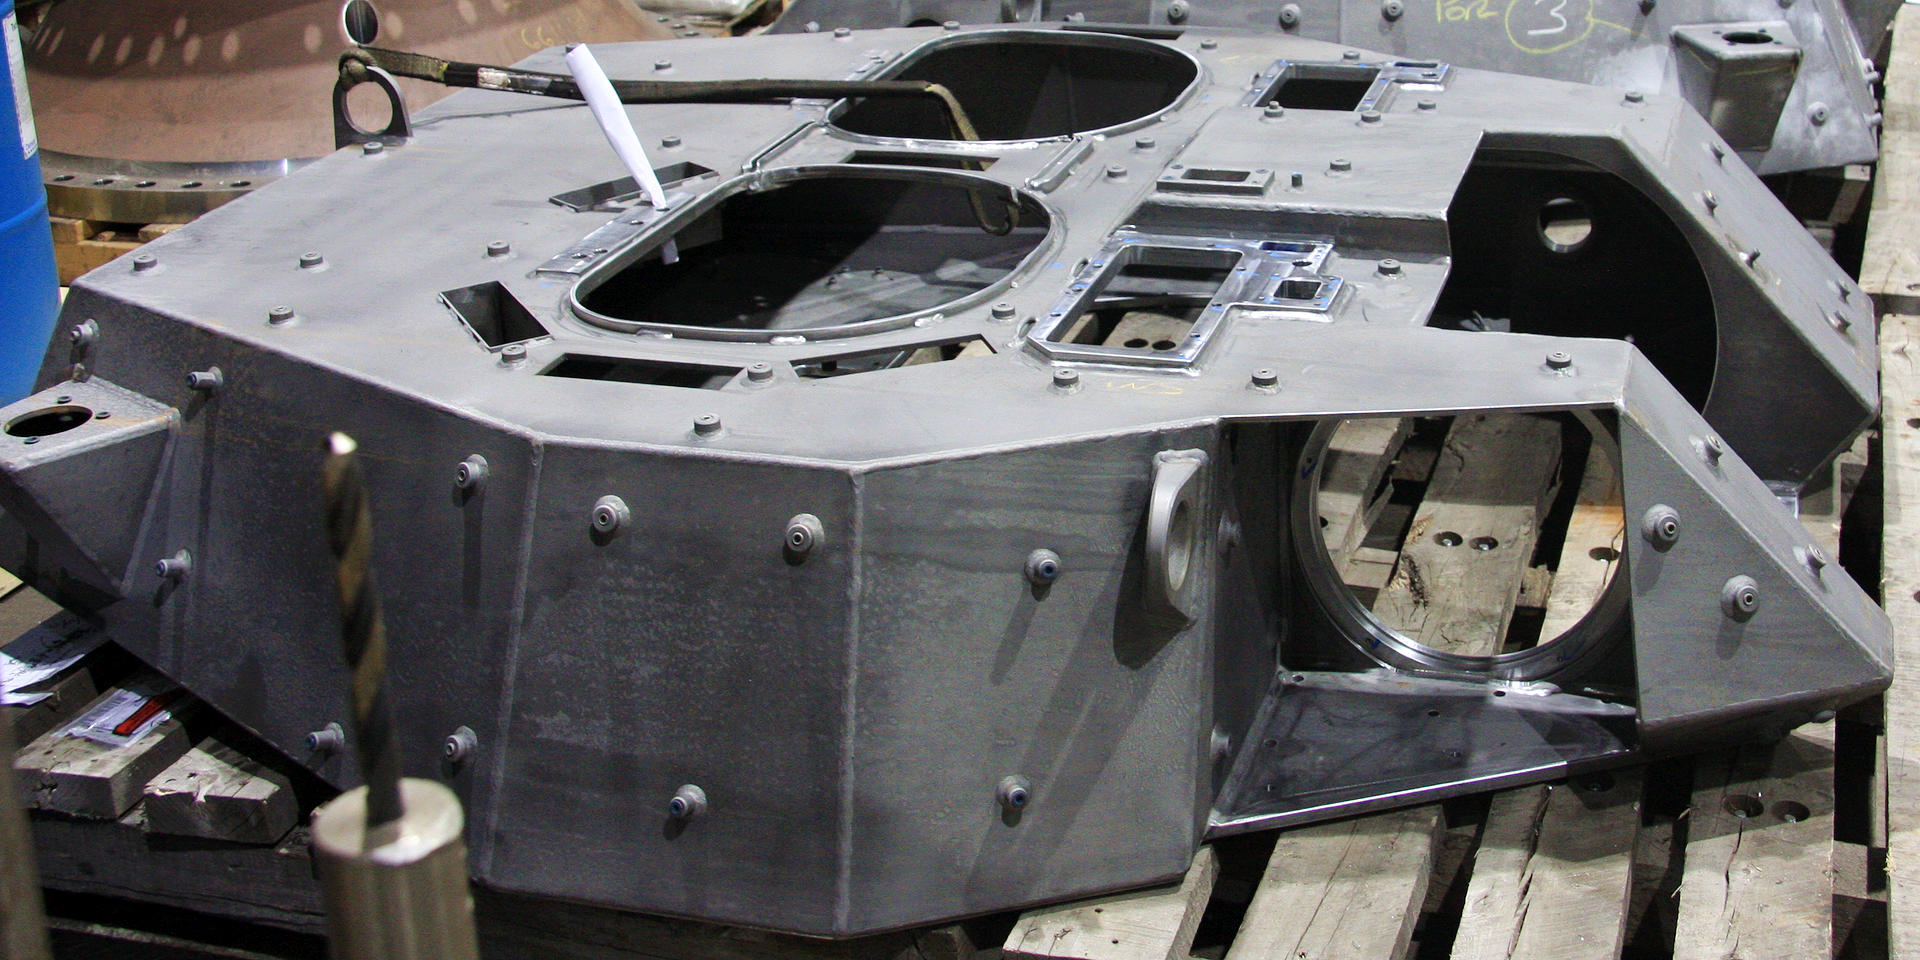 A Turret in final inspection waiting to be shipped to customer.